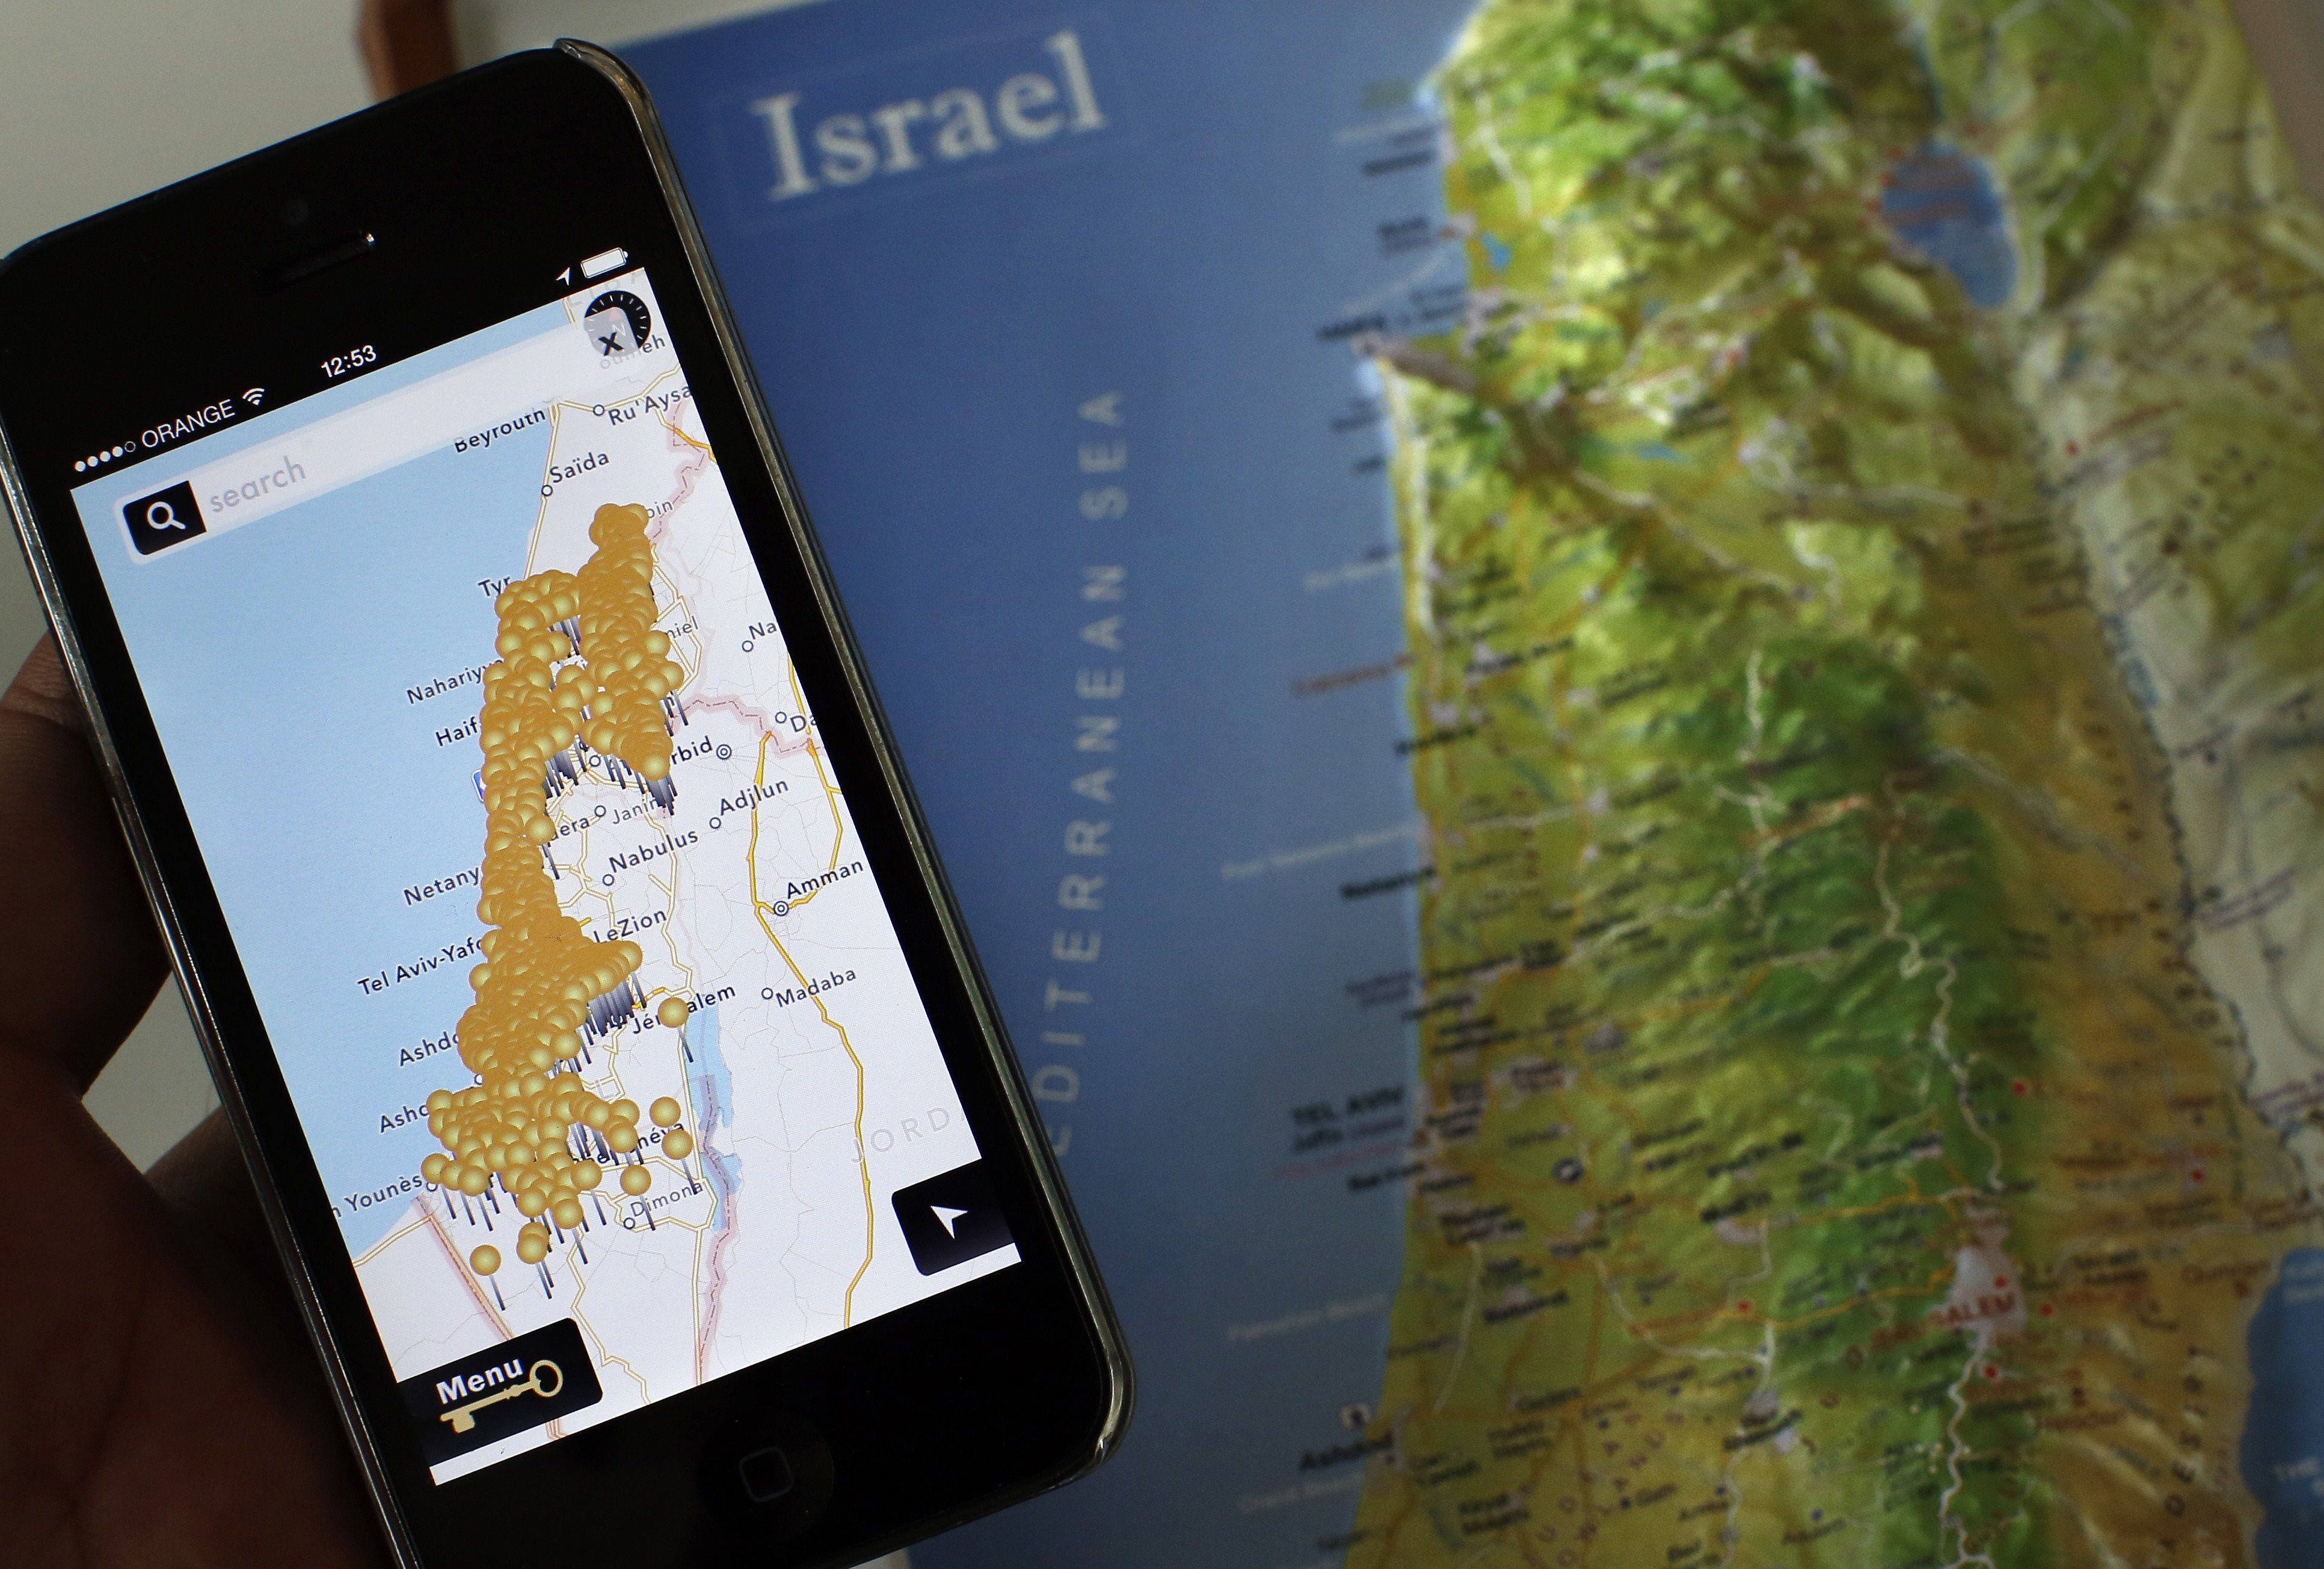 A smartphone placed on an Israeli map in Jerusalem, displaying the new <i>iNakba</i> application that allows users to find the remains of Palestinian villages that now lie inside modern-day Israel, May 5, 2014.